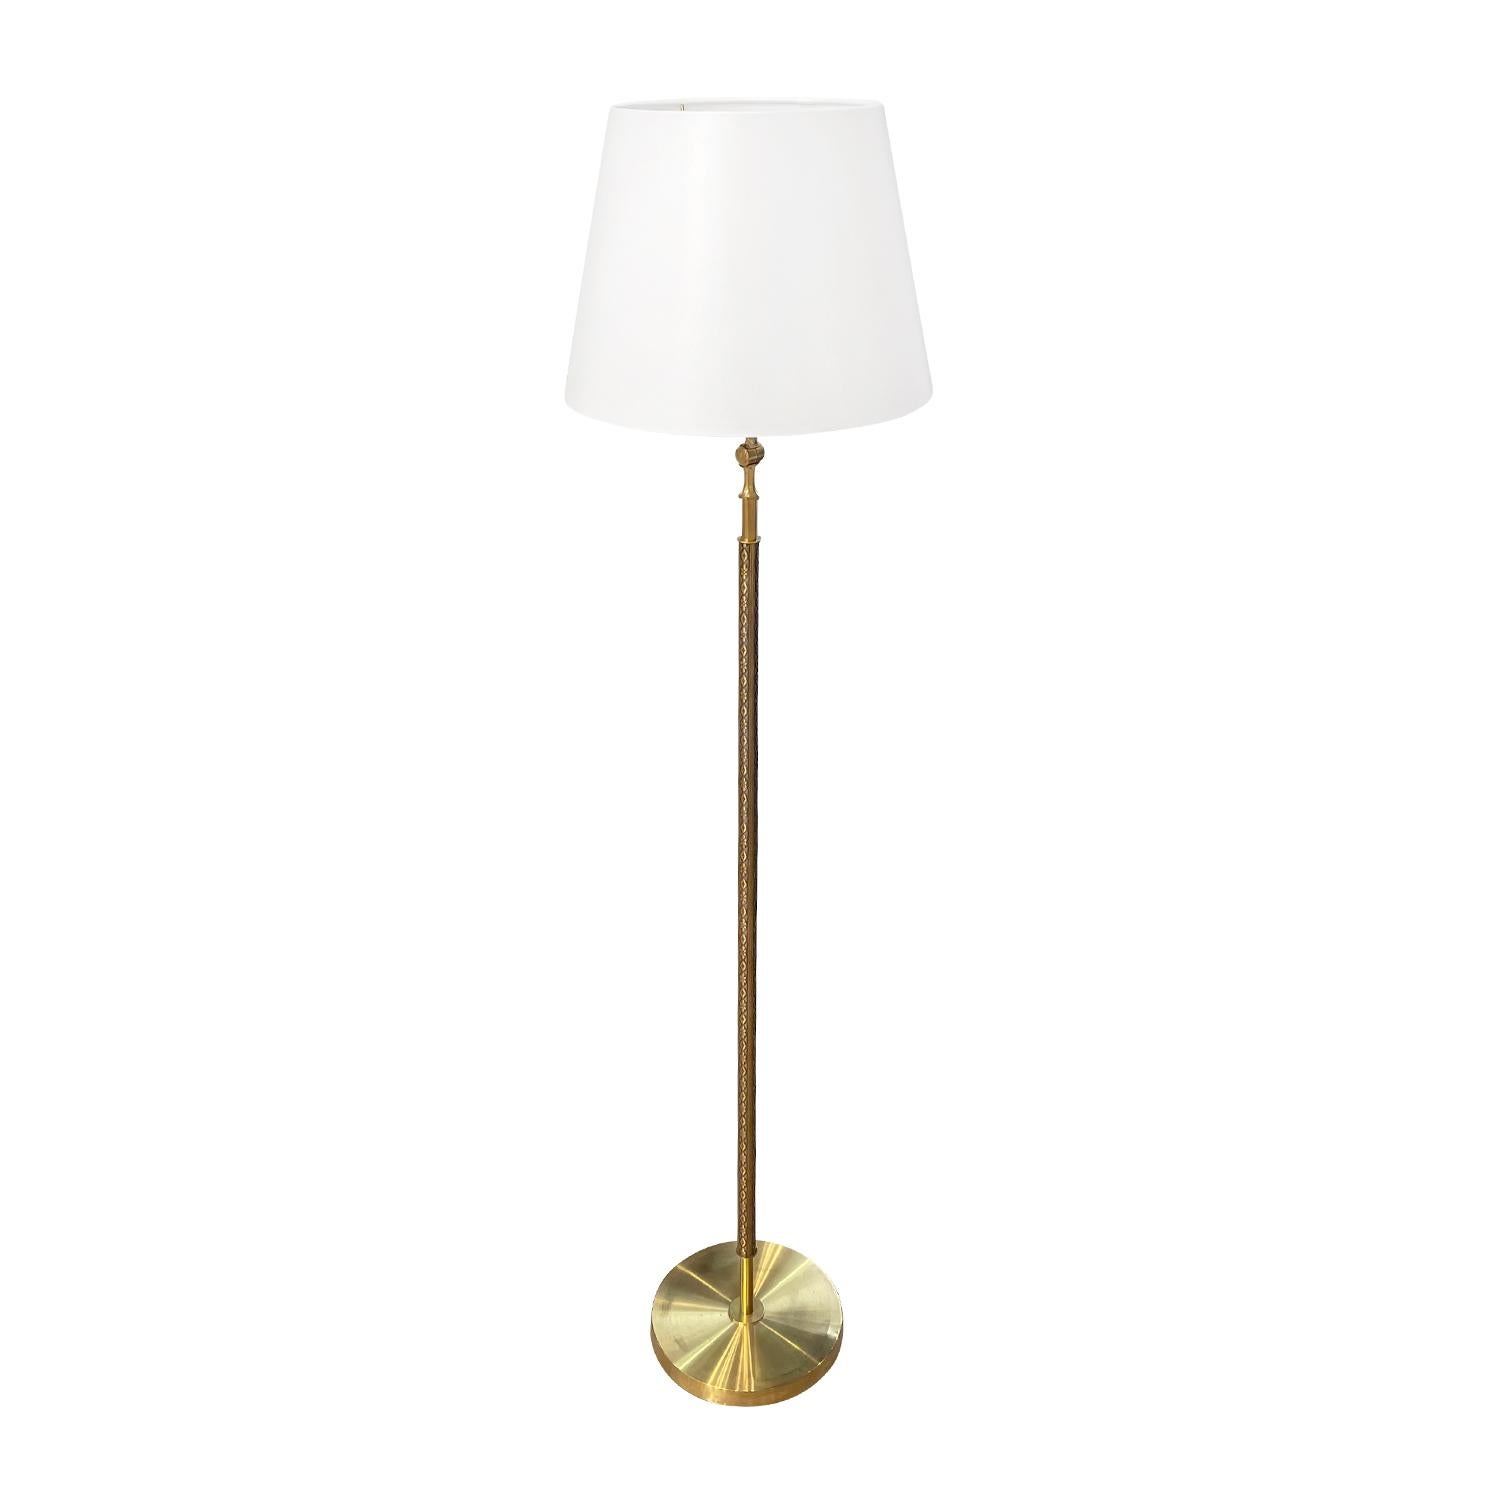 A vintage Mid-Century modern Swedish reading floor lamp with a new white round shade, made of hand crafted polished brass, designed by Falkenbergs Belysning in good condition. The stem of the Scandinavian light is enhanced by detailed brass flower